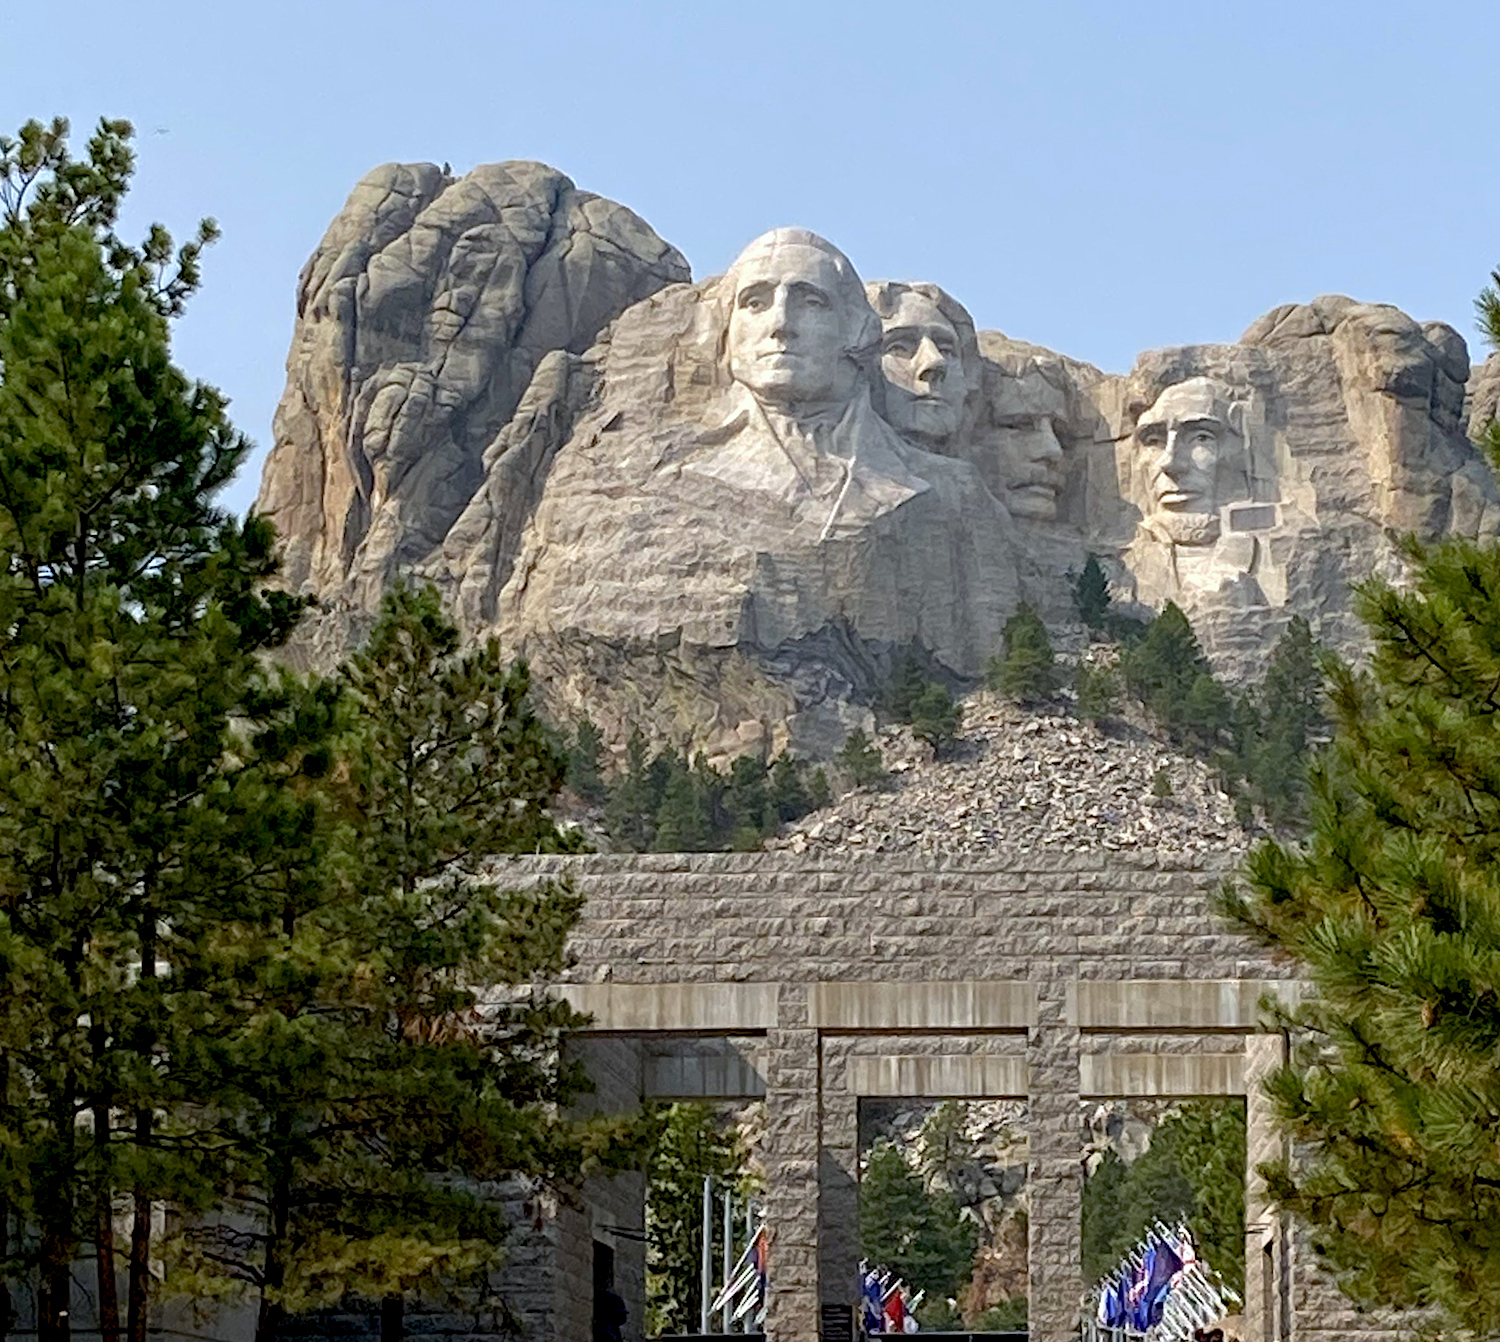 our visit to mount rushmore was awesome